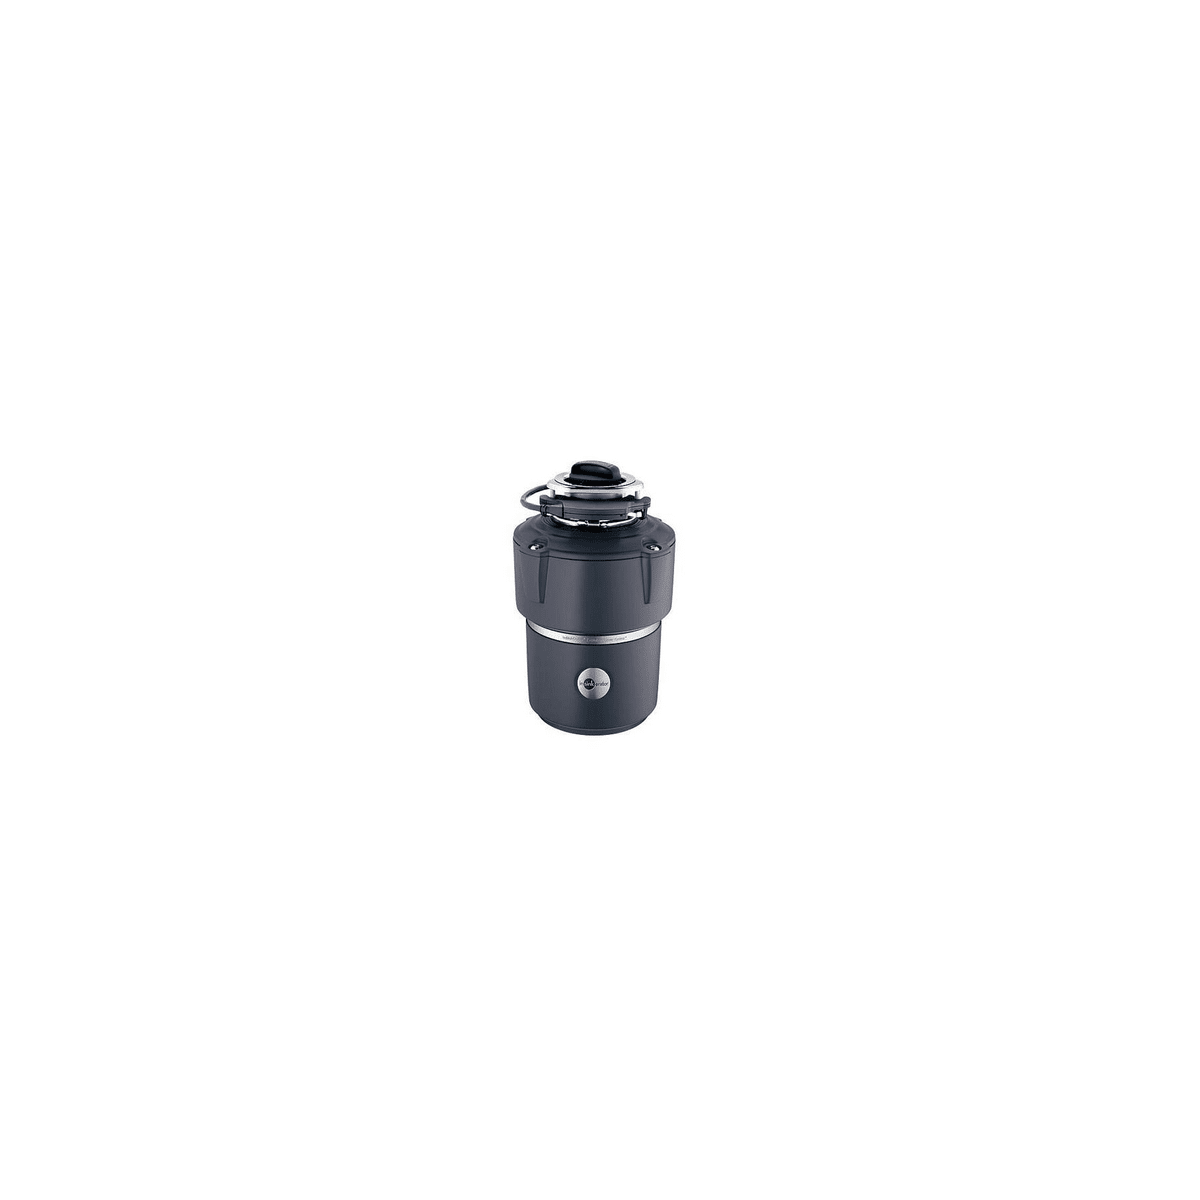 InSinkErator 79342A-ISE Evolution 7/8 HP Garbage Disposal